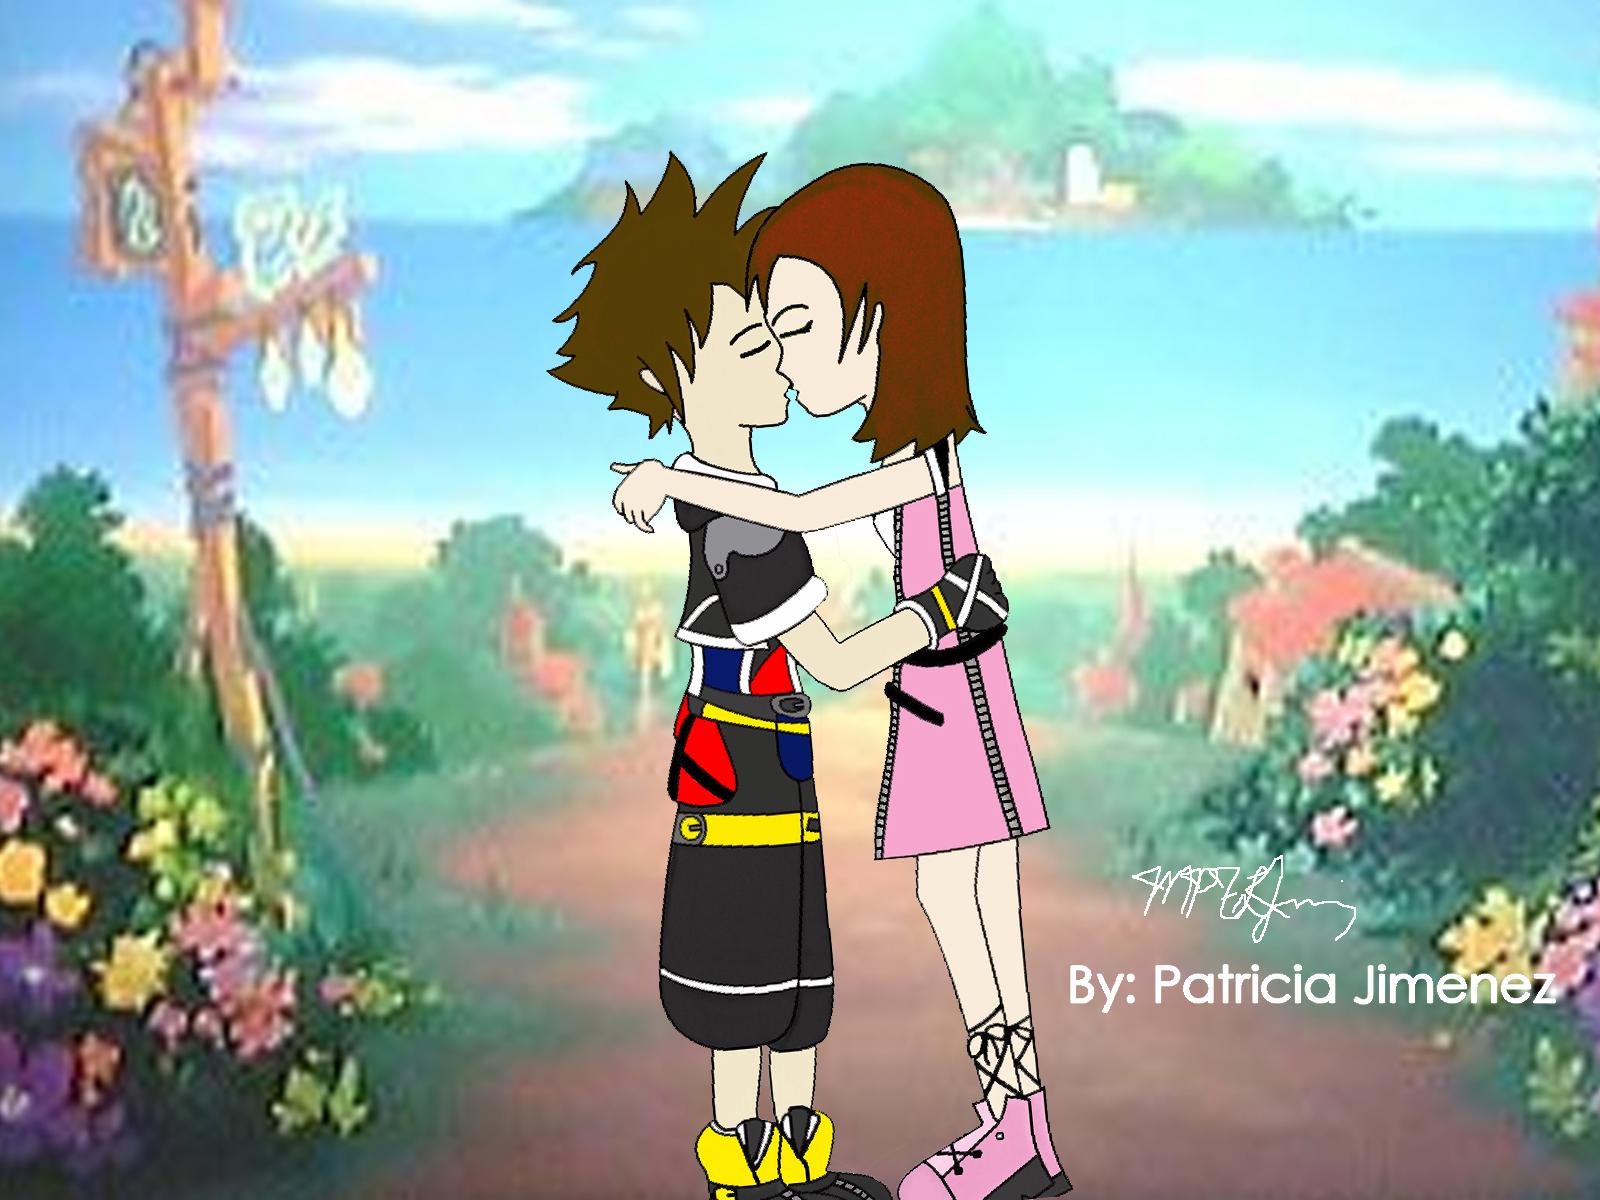 Sora and Kairi kissing (KH2) by Angelic_fire